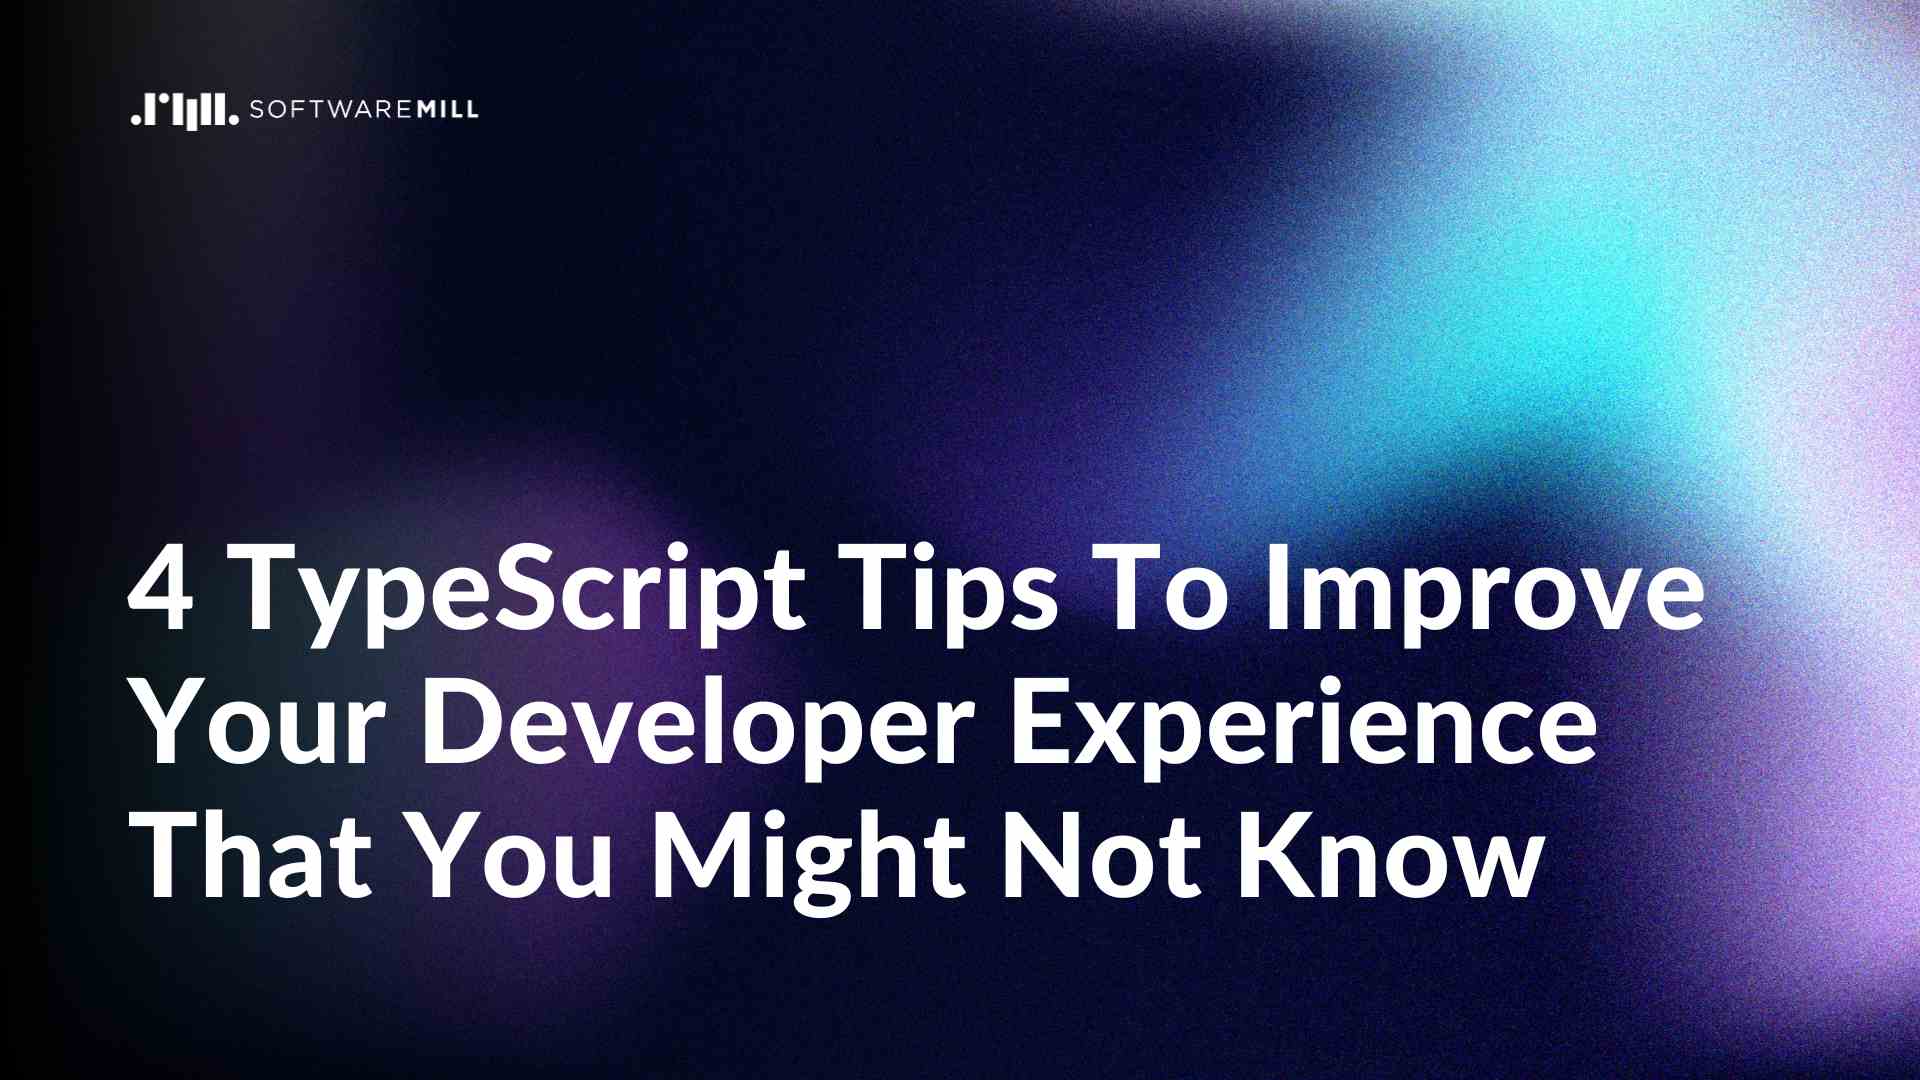 4 TypeScript Tips To Improve Your Developer Experience That You Might Not Know webp image